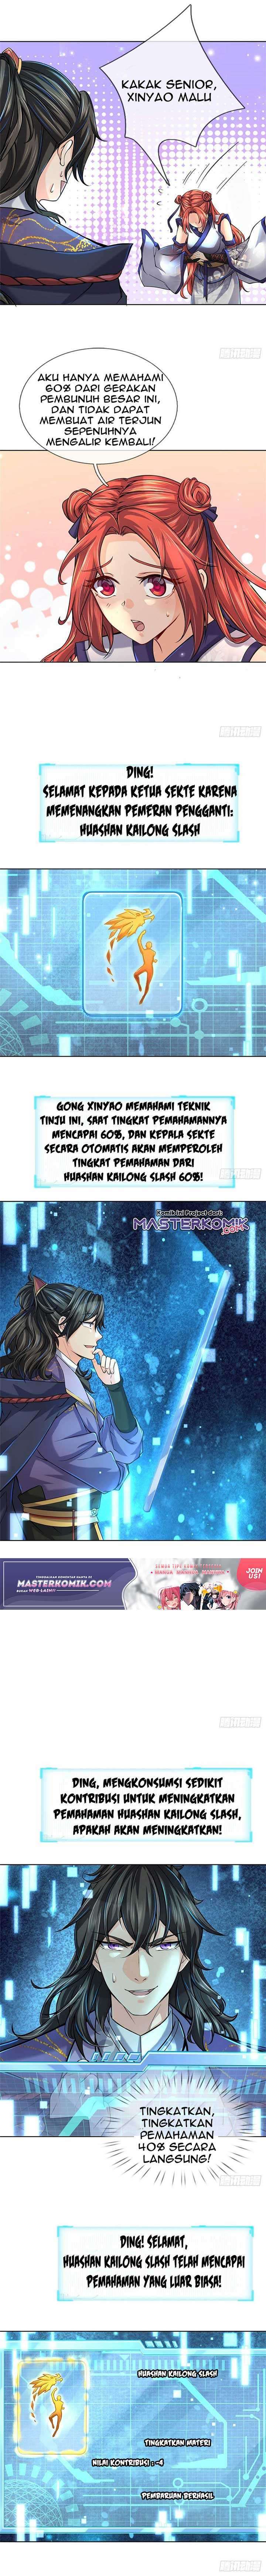 The Way of Domination Chapter 17 5